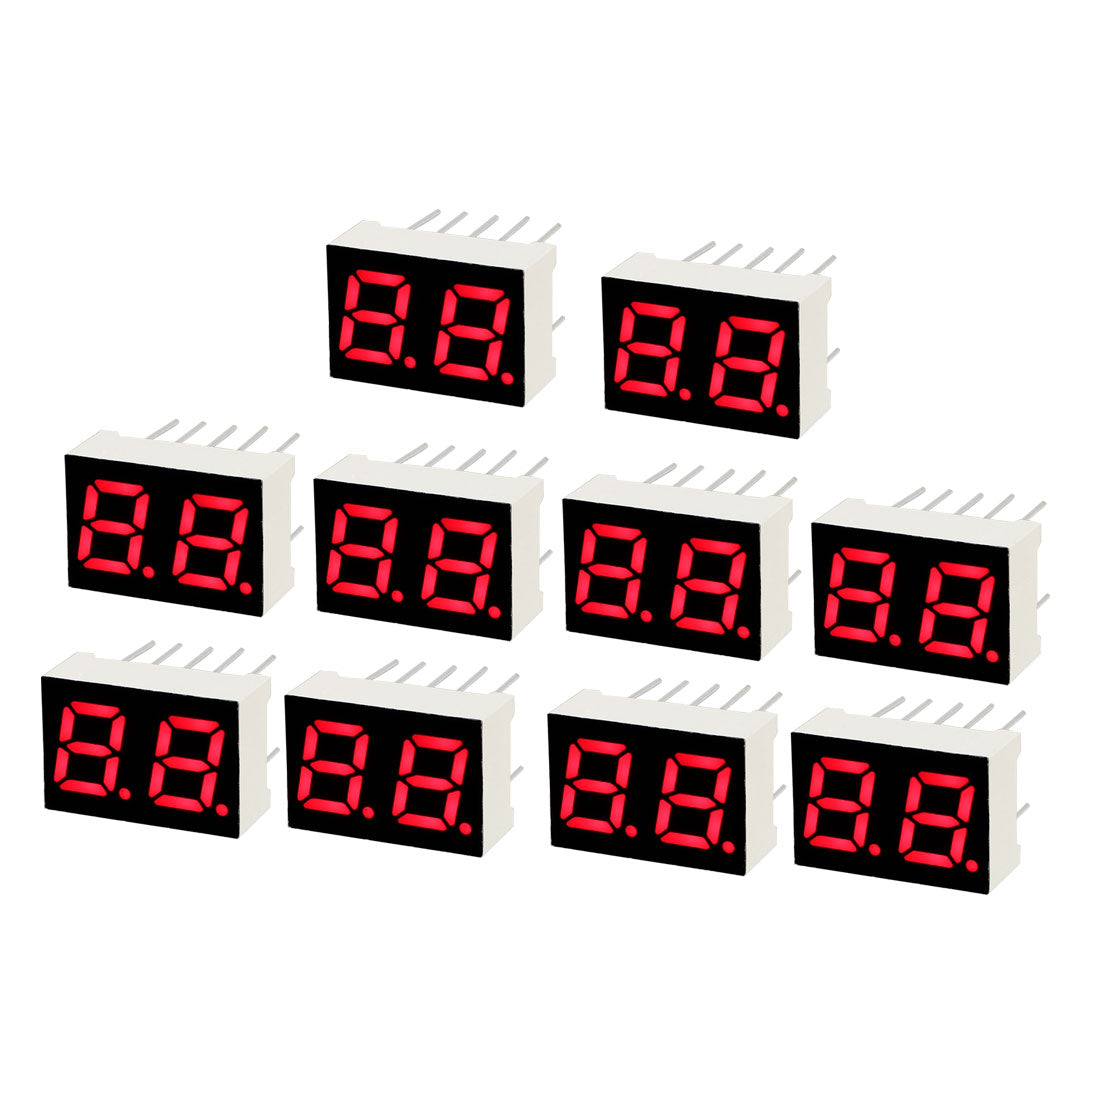 Uxcell Uxcell Common Anode 10 Pin 2 Bit 7 Segment 0.59 x 0.39 x 0.24 Inch 0.28" Red LED Display Digital Tube 10pcs